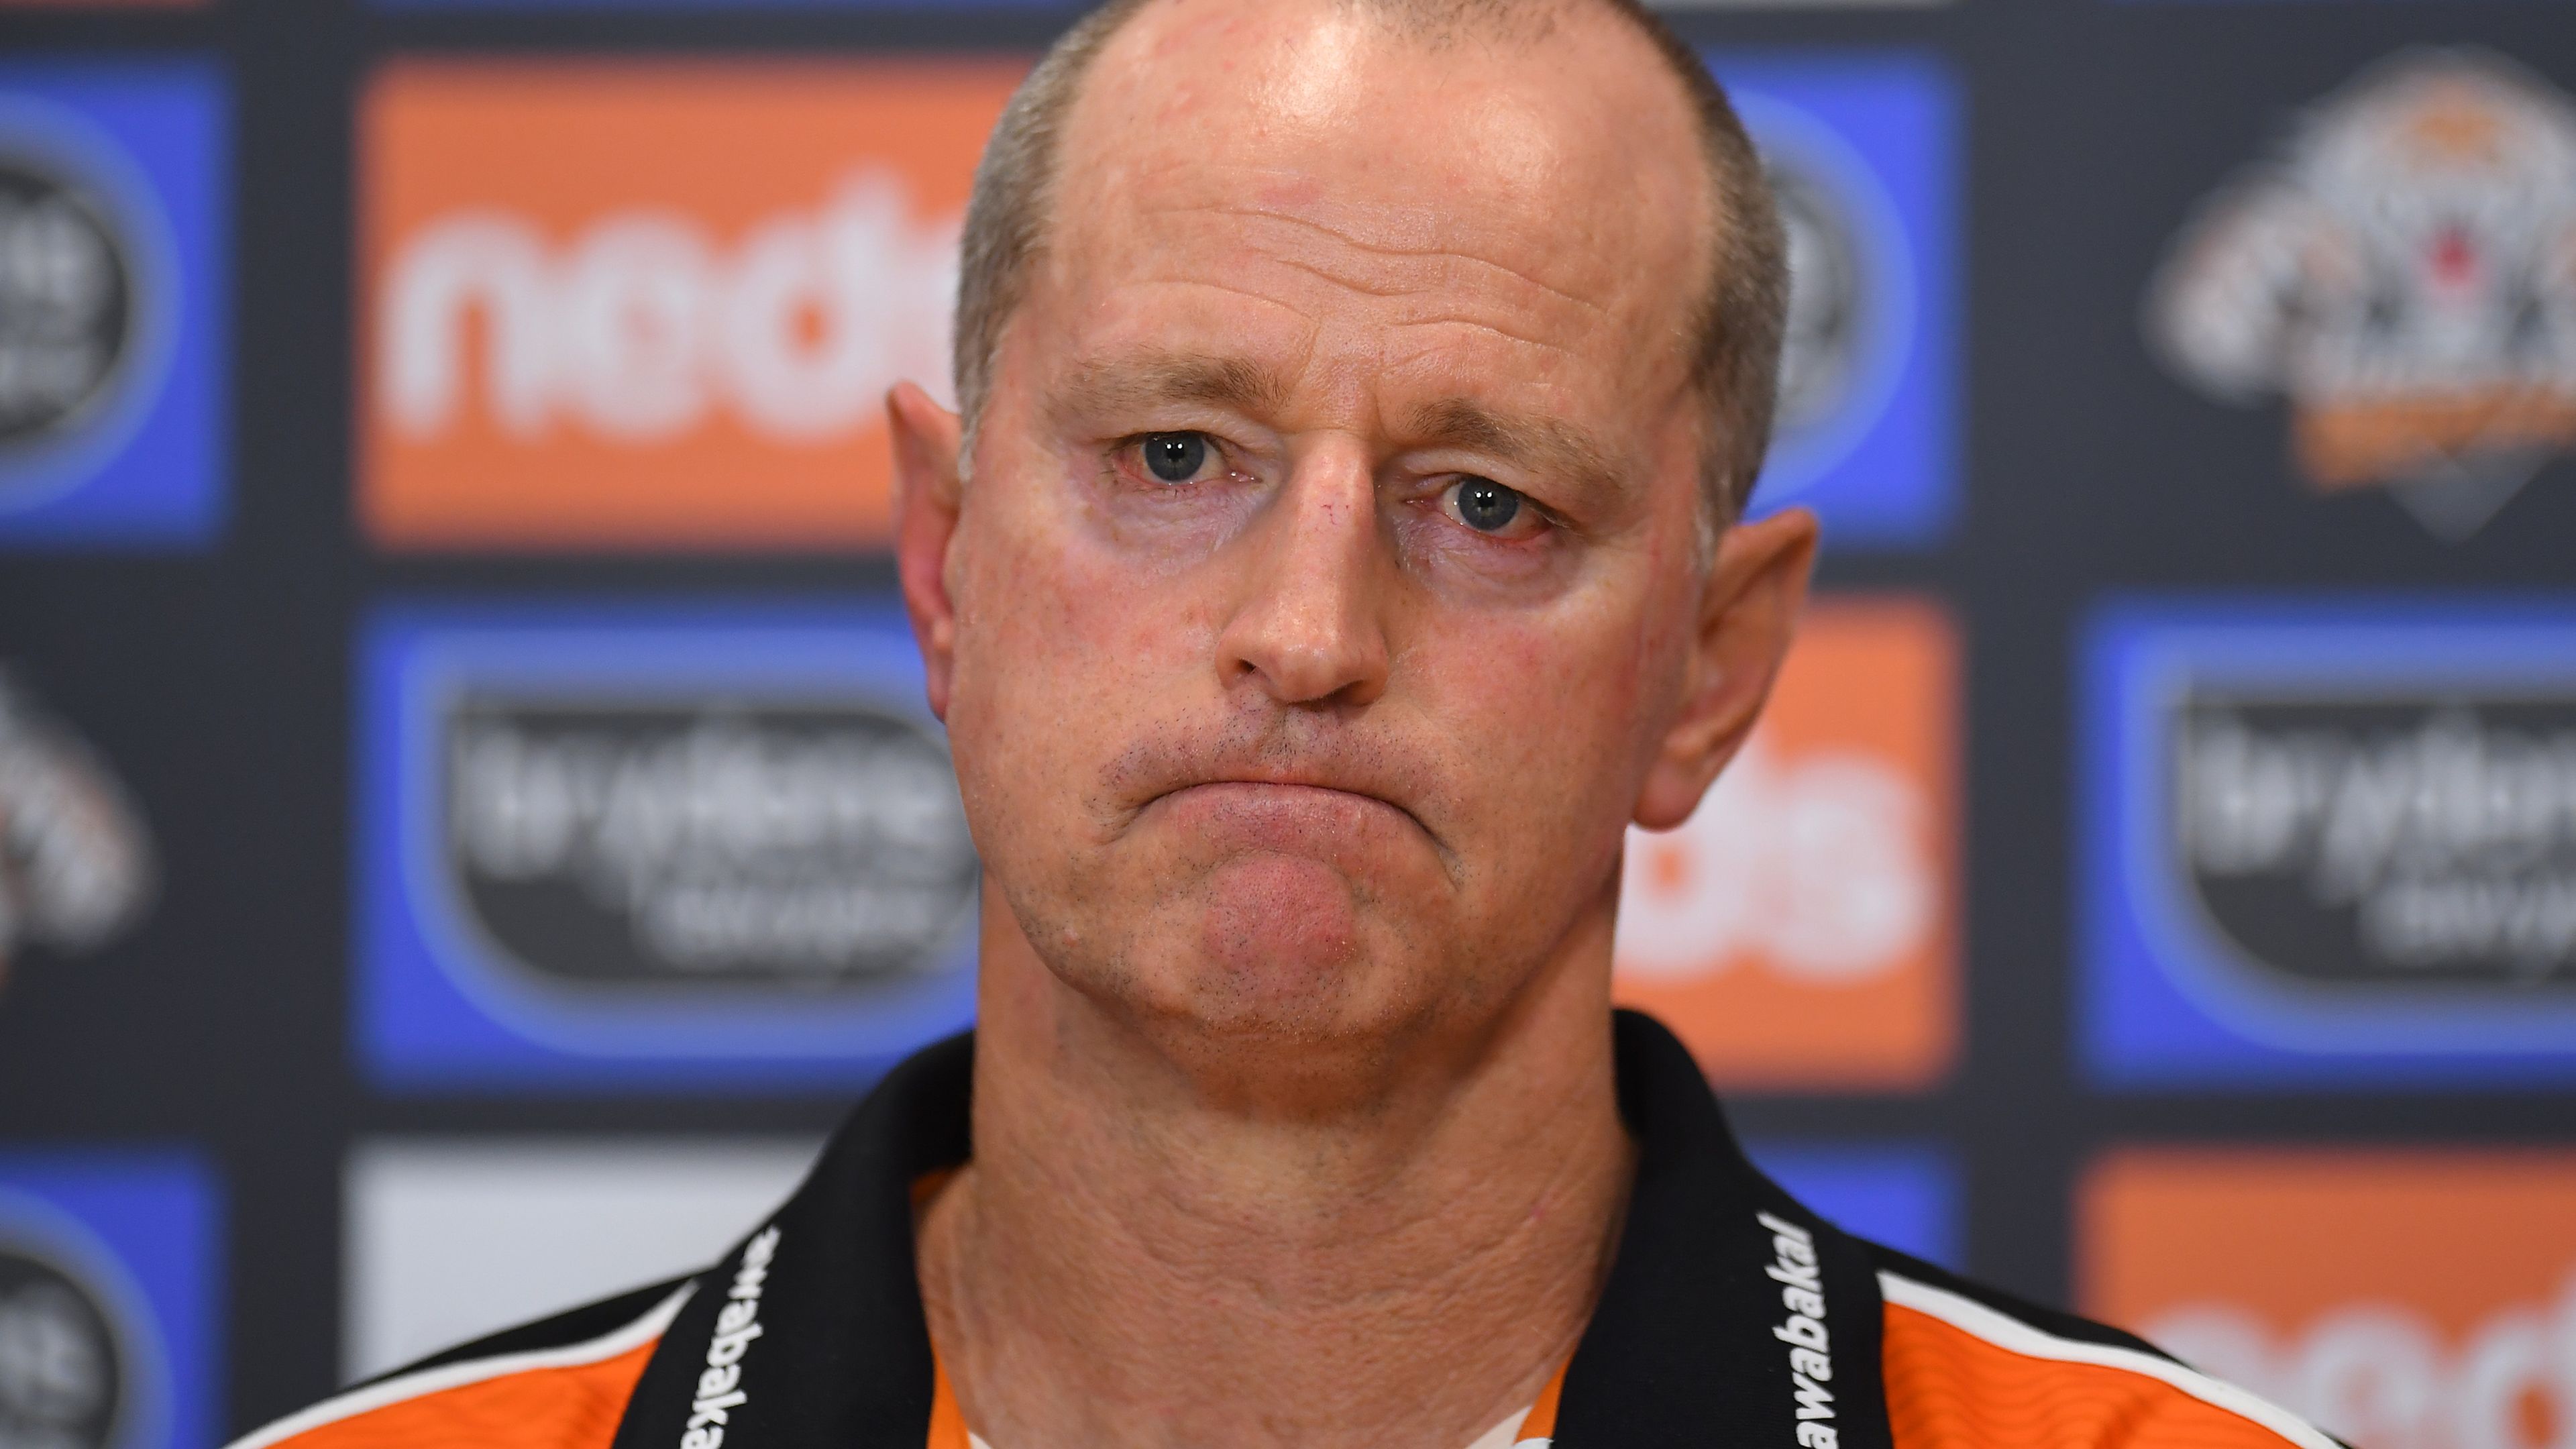 Wests Tigers sack coach Michael Maguire to aid club's development, Brett Kimmorley named as interim replacement